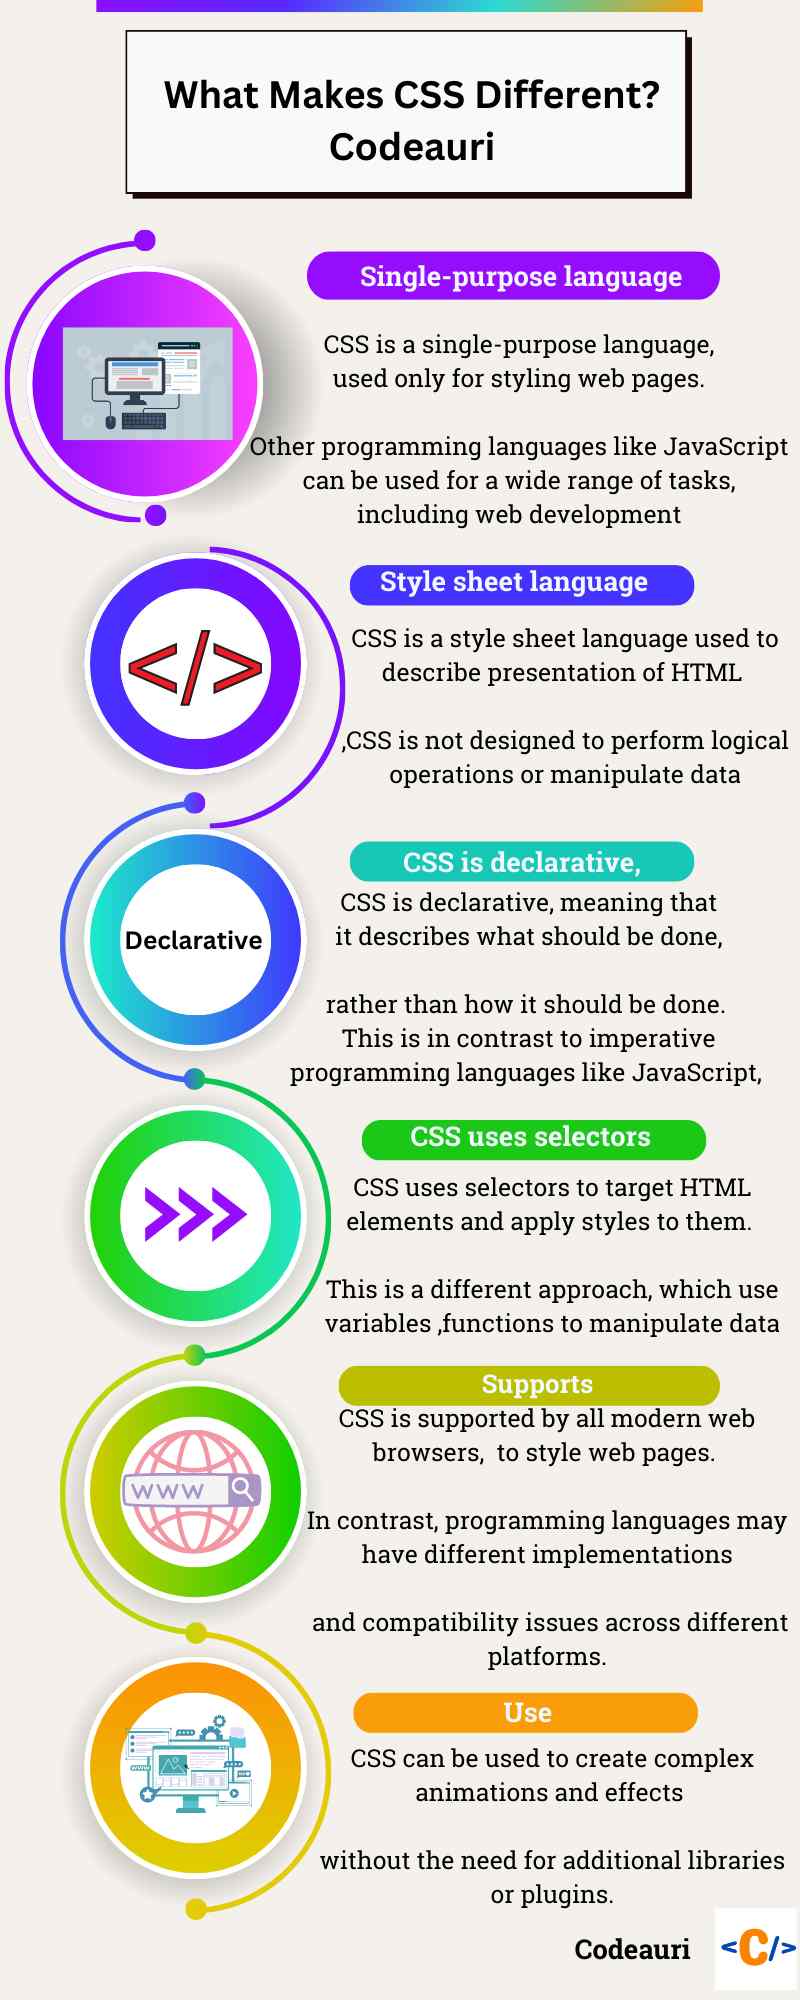 How-css-is-different-than-other-language-codeauri